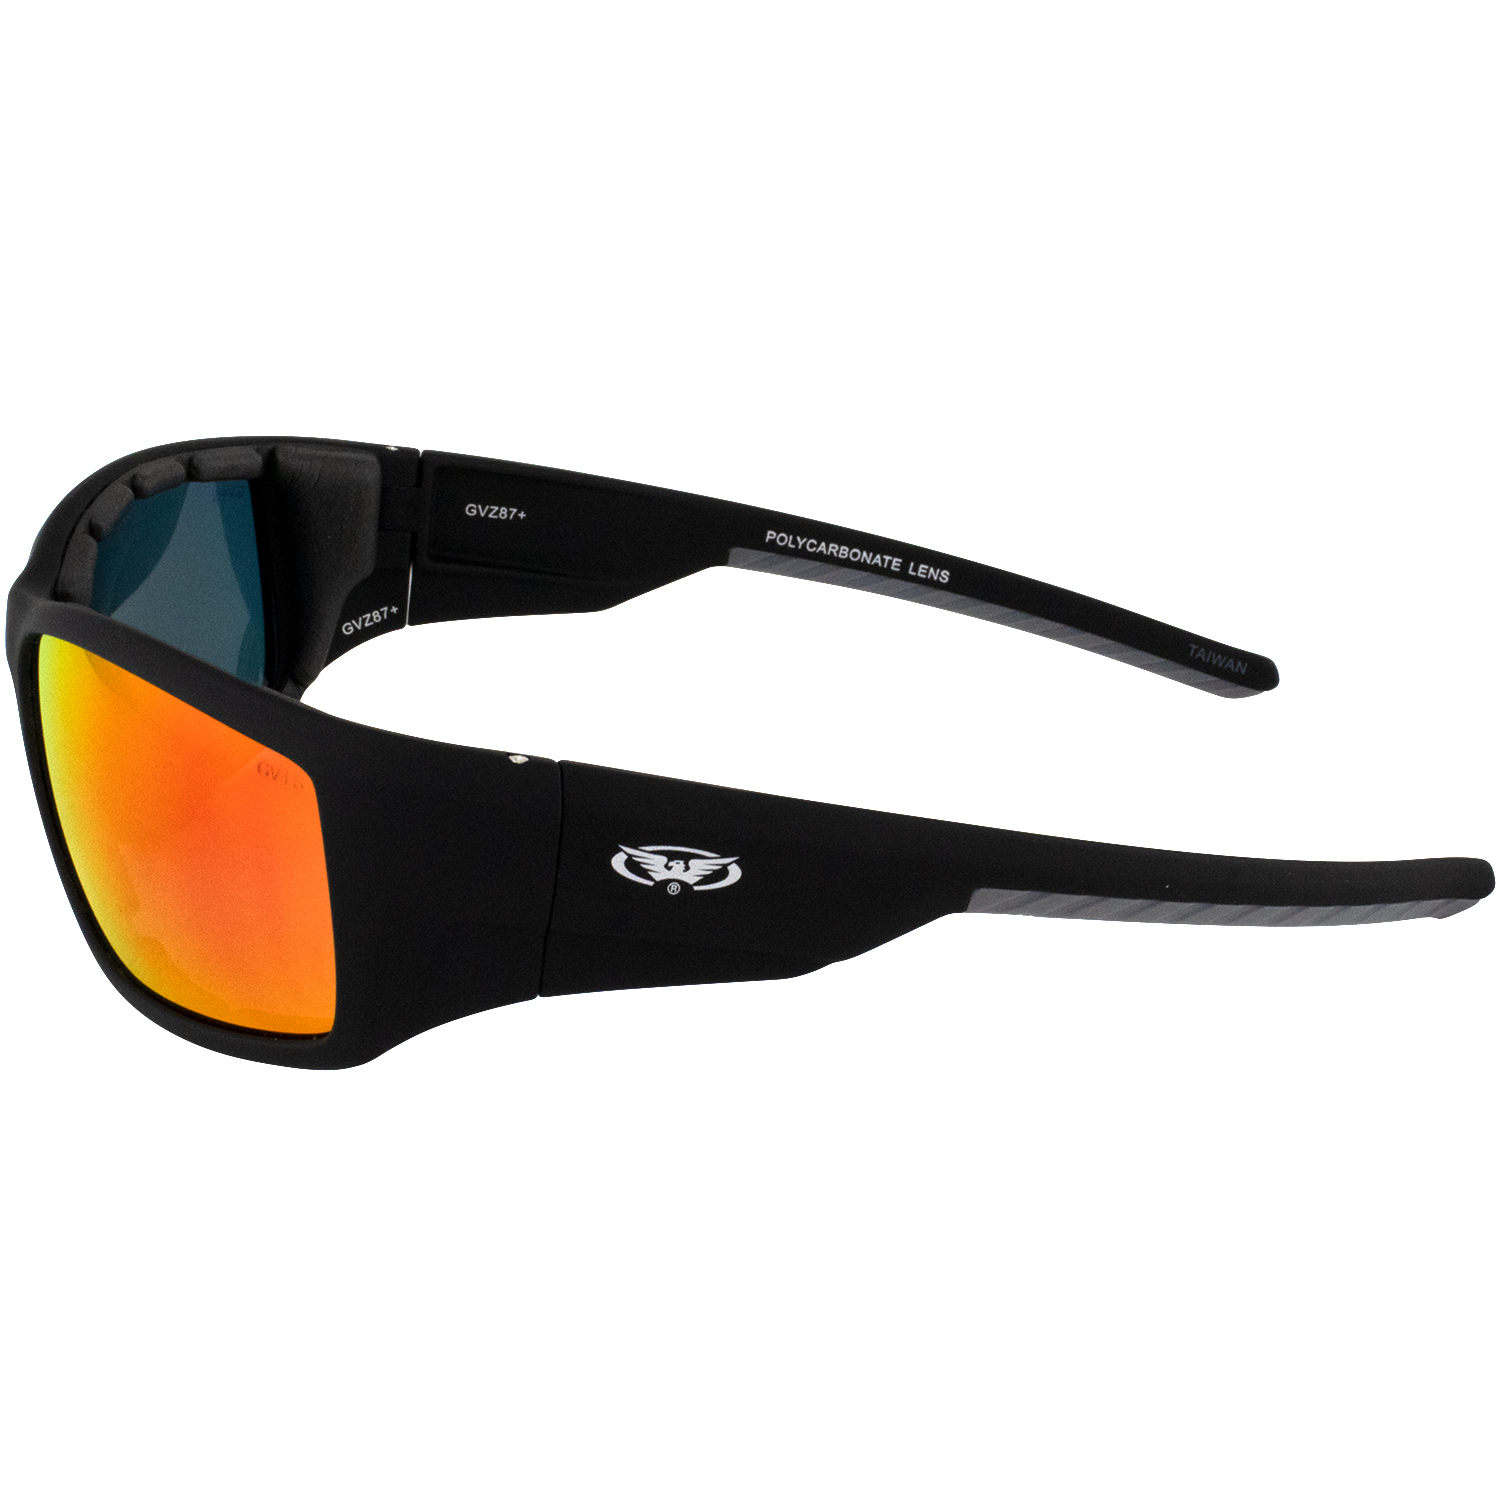 Global Vision Eyewear Kinetic Foam Padded Motorcycle Safety Sunglasses Soft Touch Black Frames with G-Tech Red Mirror Lenses - image 5 of 7